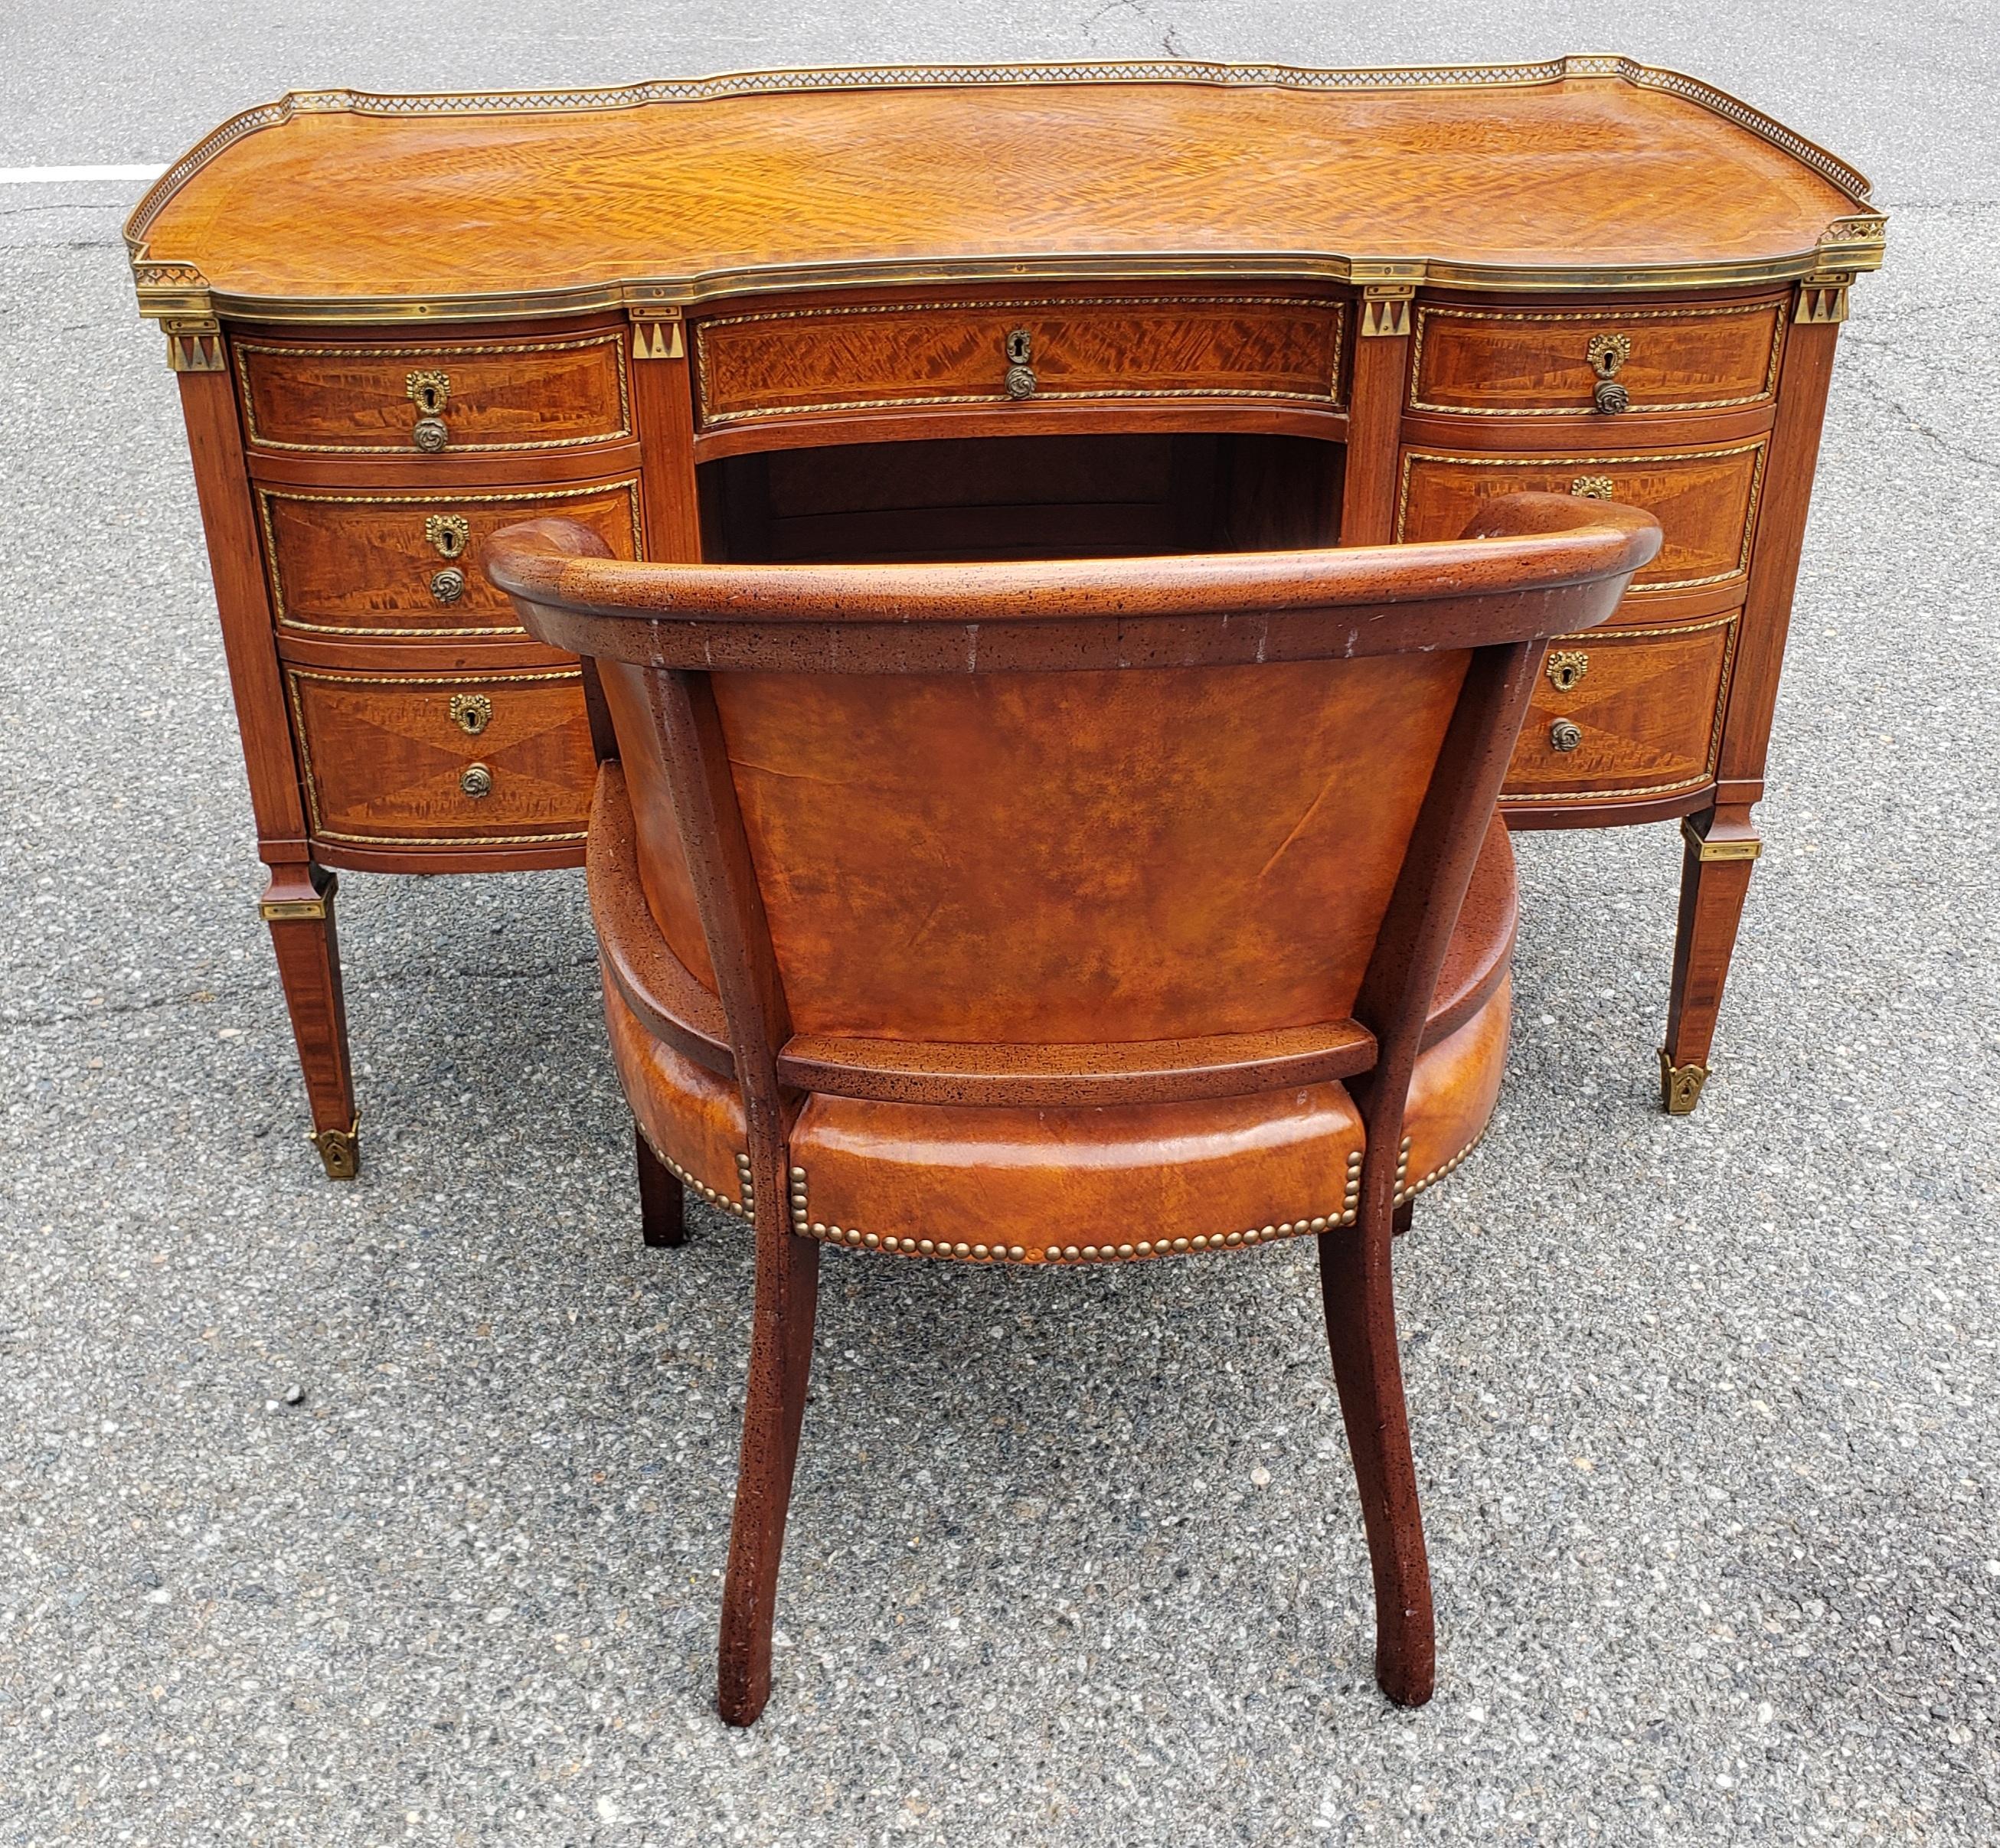 Louis XVI Style Ormolu Mounted Galleried Mahogany Burl and Marquetry Desk  For Sale 8